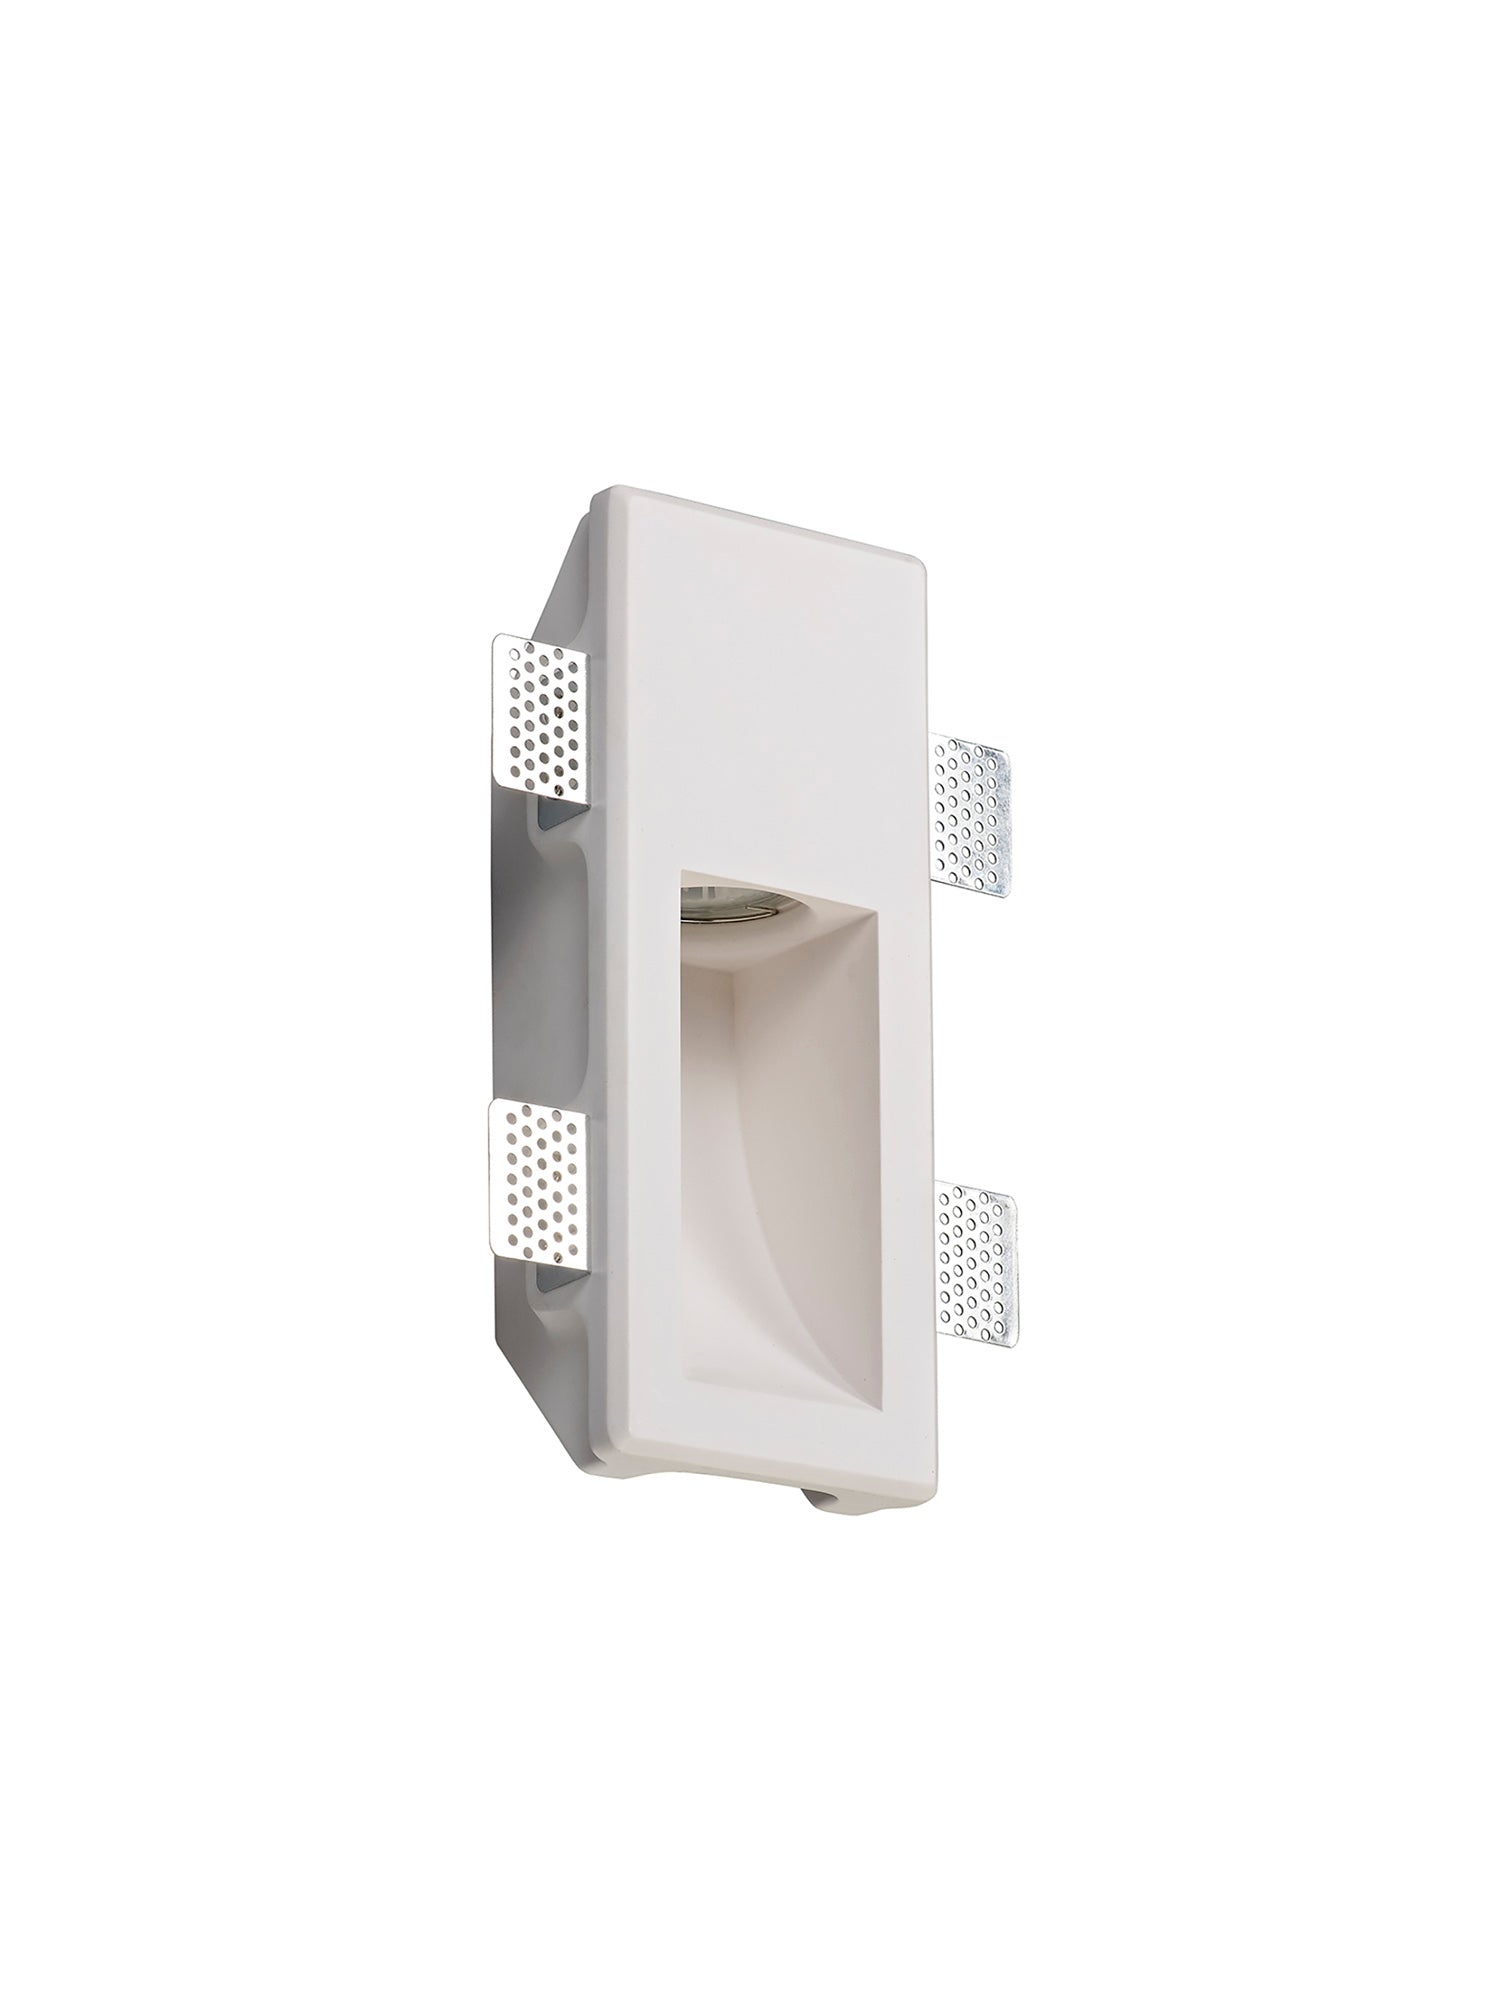 Plastin Small Recessed Wall Lamp, 1 x GU10, White Paintable Gypsum, Cut Out: L:253mmxW:103mm